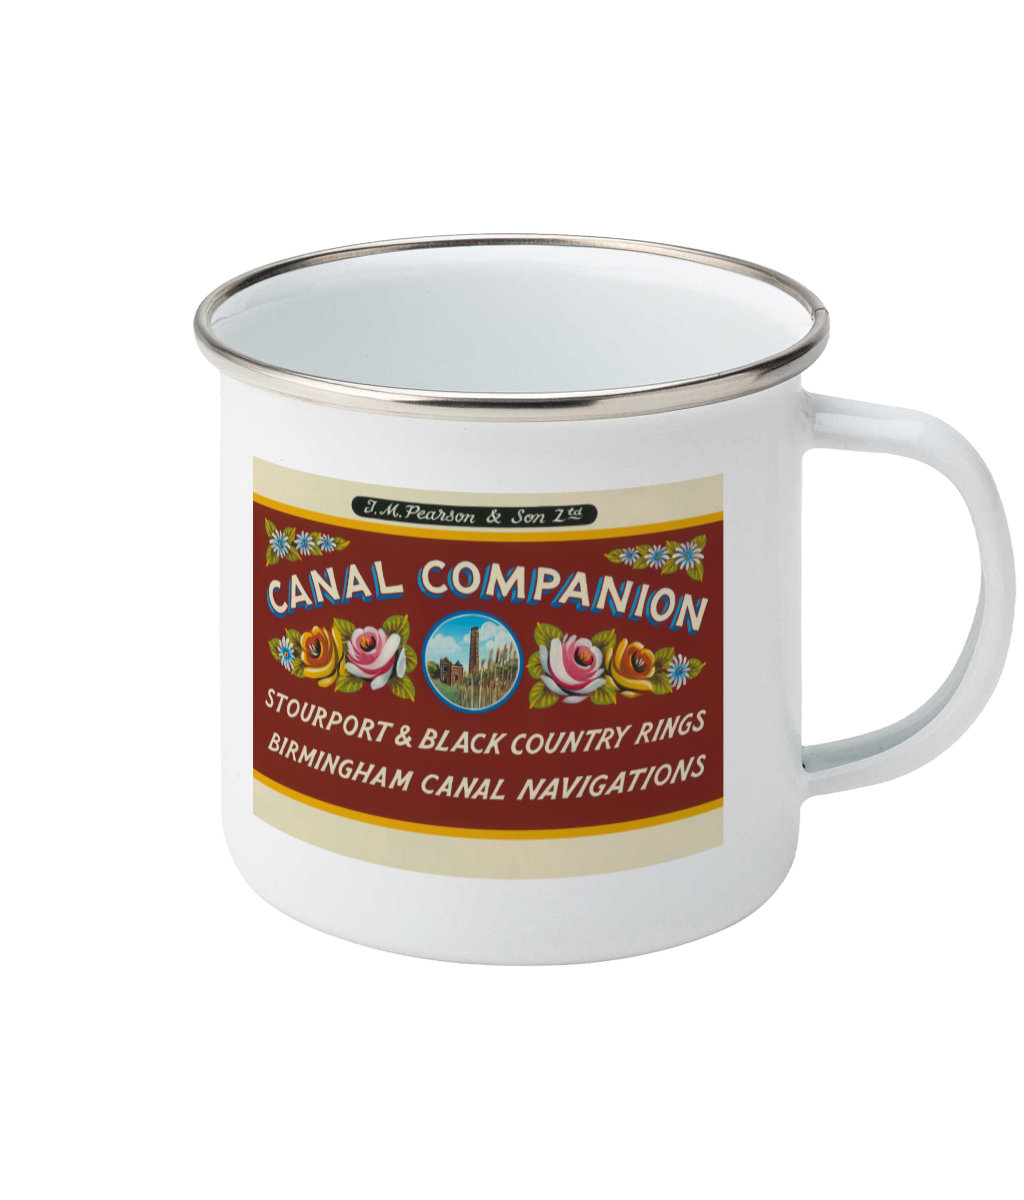 Pearson Canal Companion Enamel Mug - Stourport And Black Country Rings